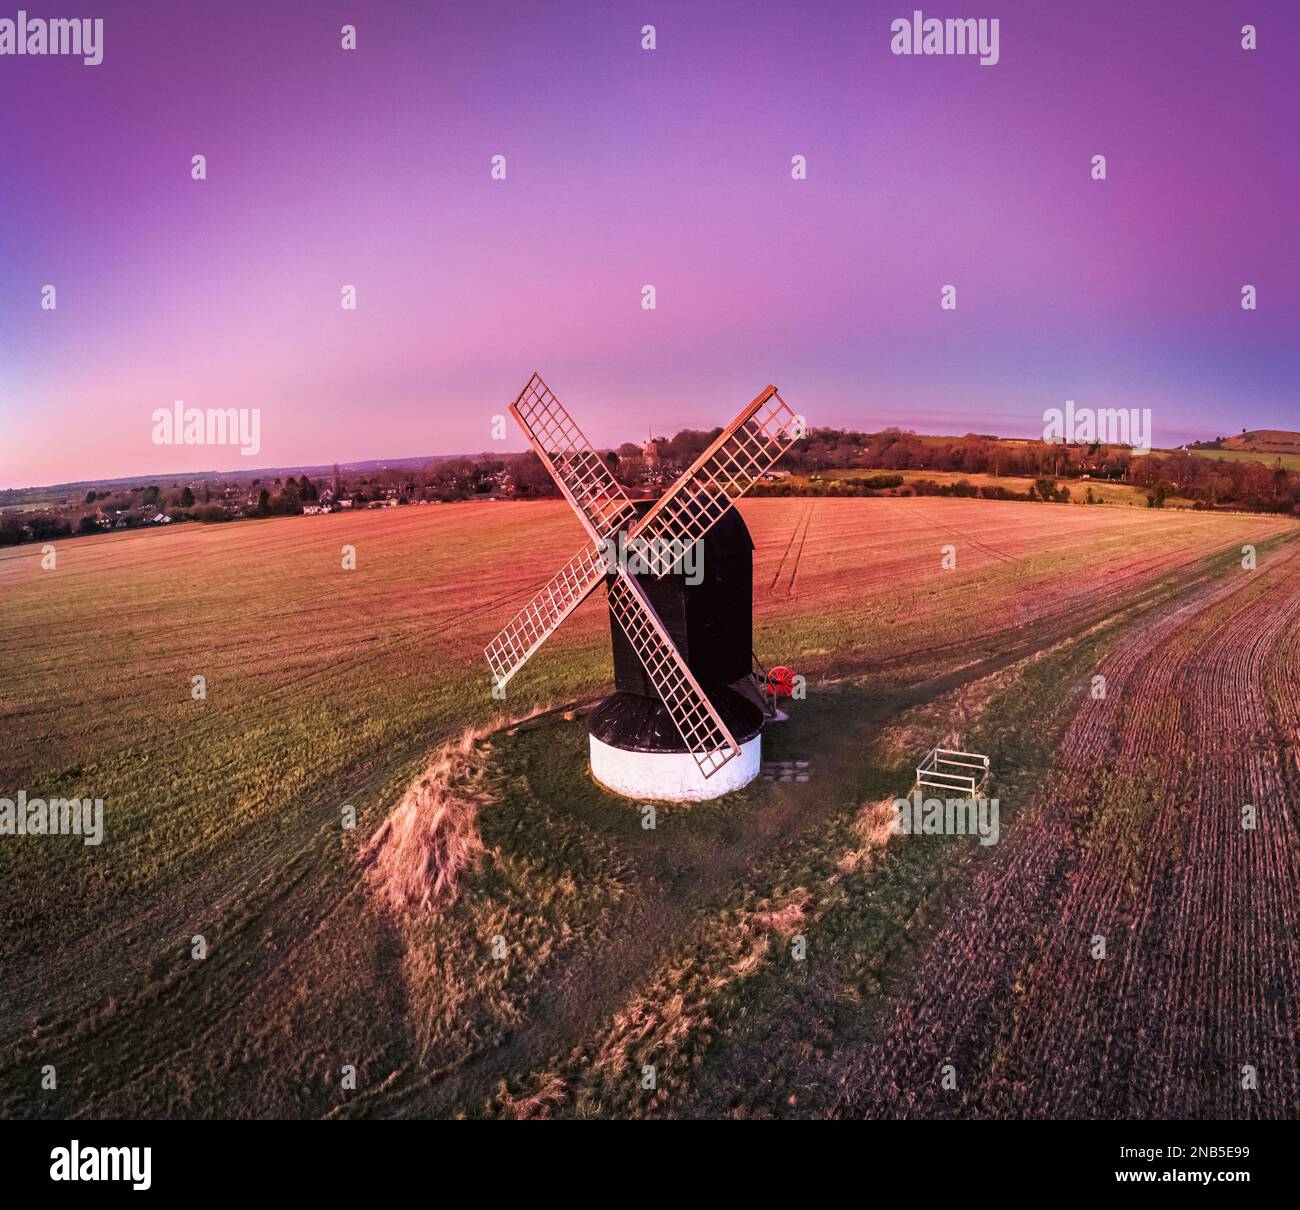 A beautiful view of the Pitstone Windmill in England during sunset Stock Photo